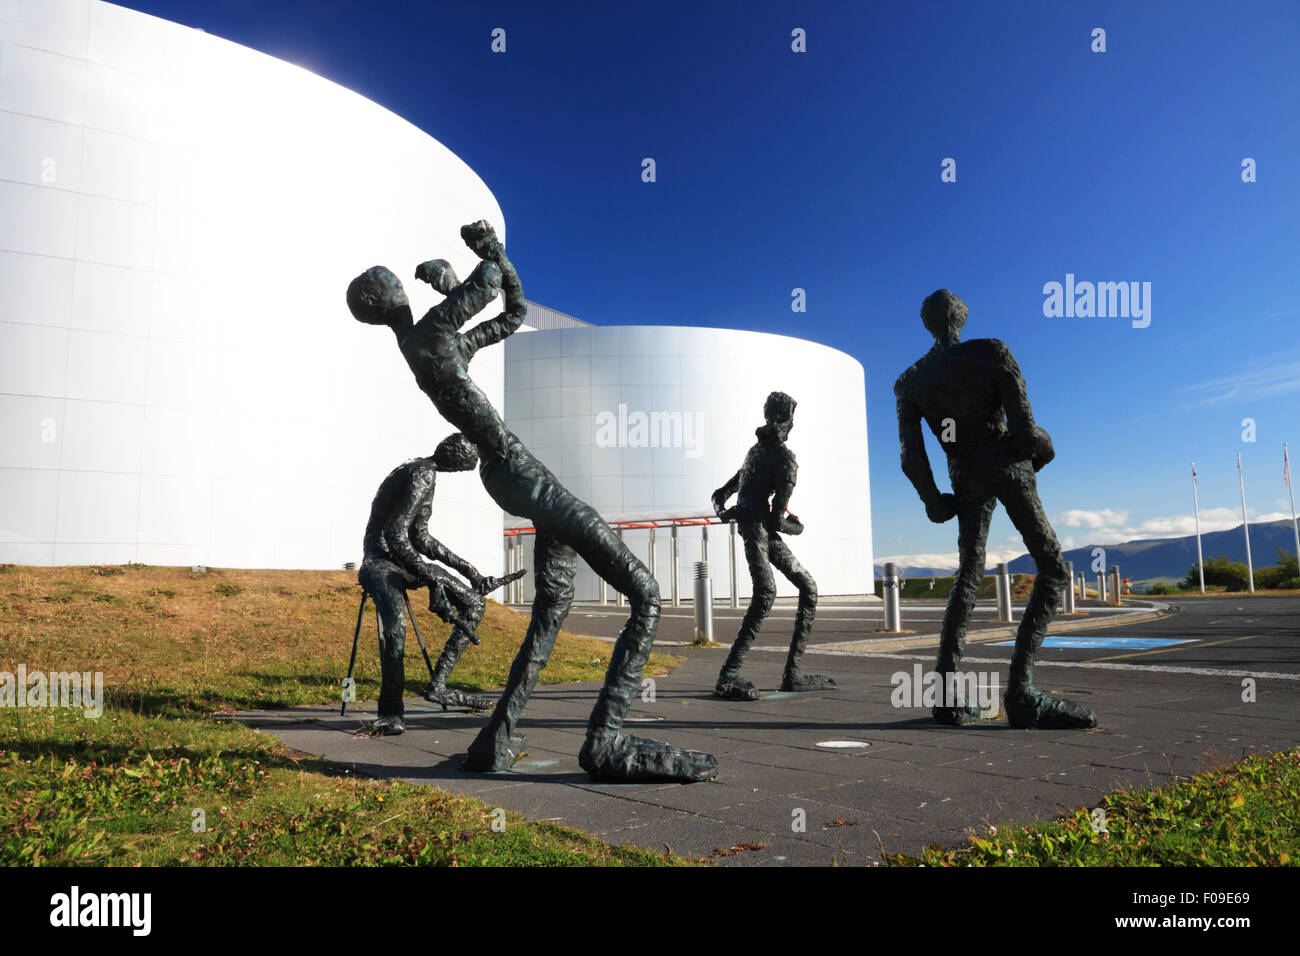 A group of bronze figures depicting musicians beside a group of metal storage tanks. Stock Photo